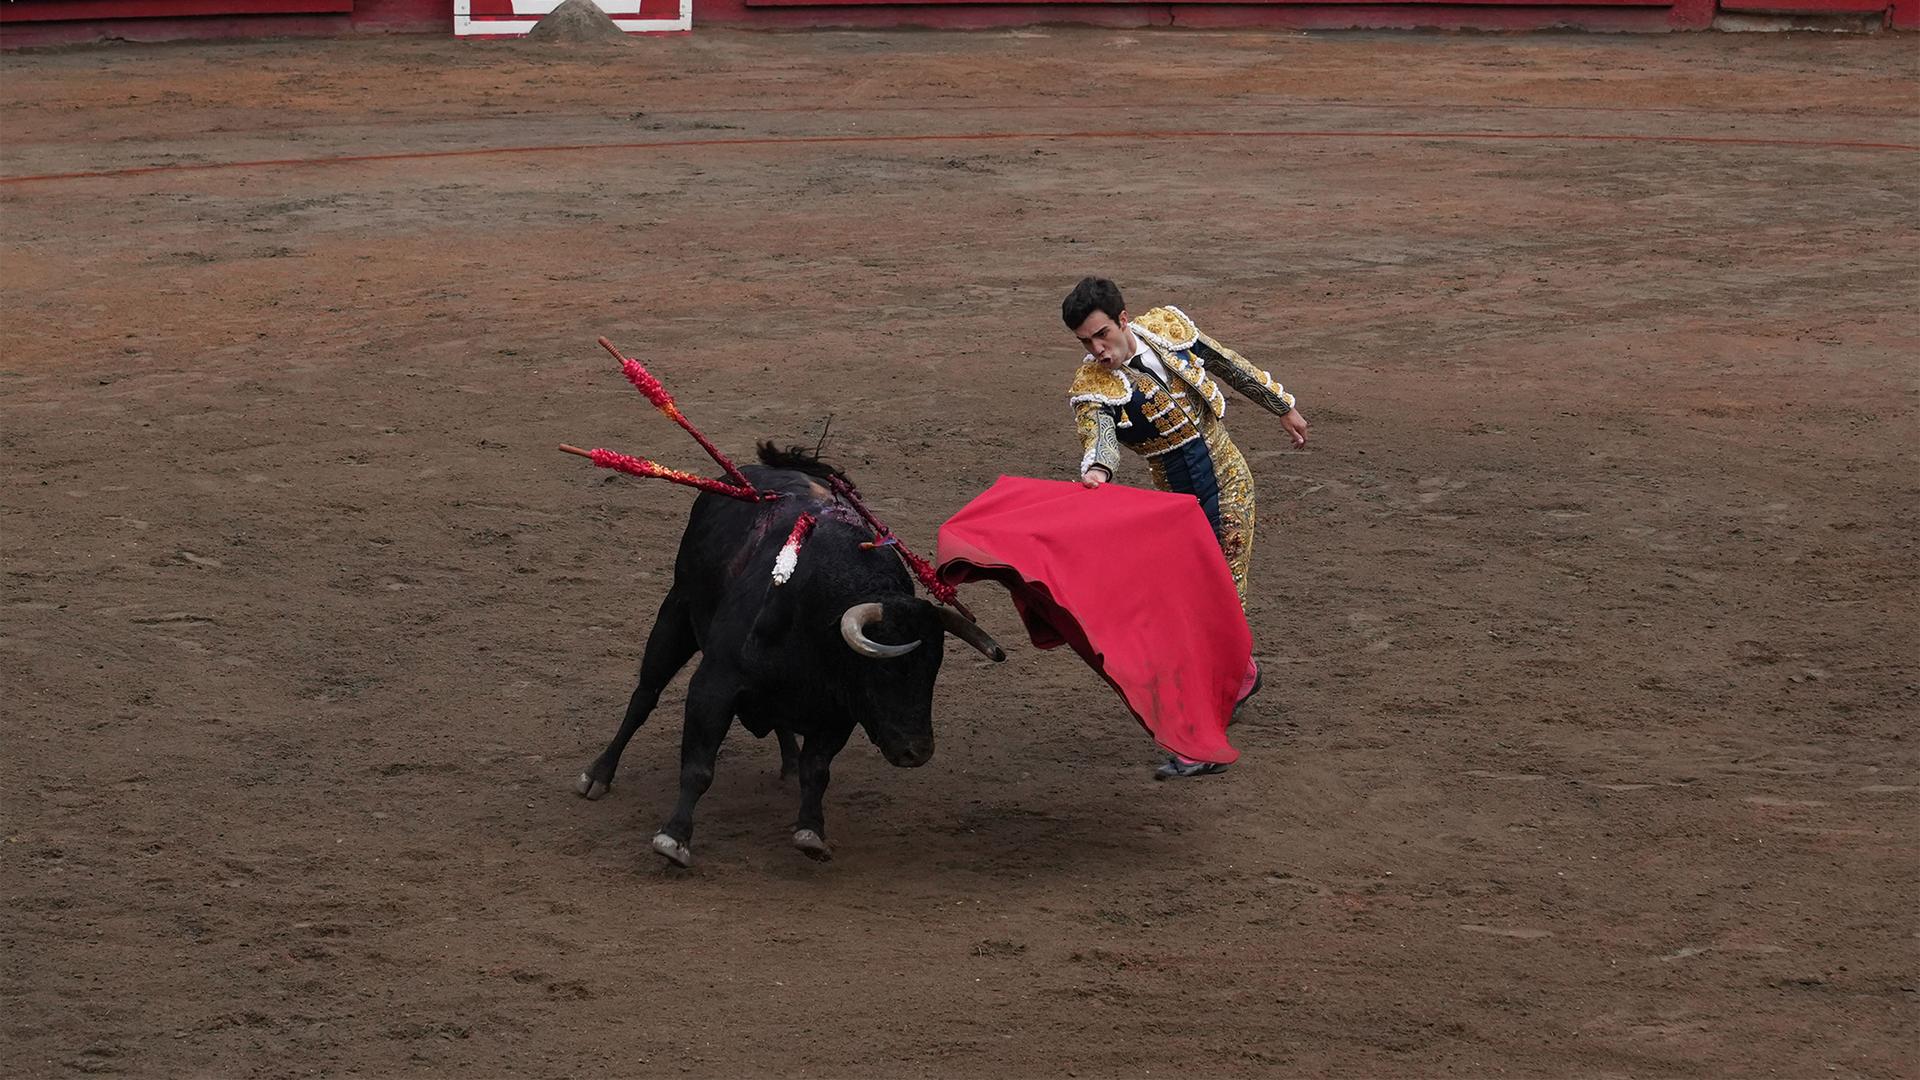 Bullfighting is still legal in the Colombian city of Manizales, which holds a major festival on the first week of January.